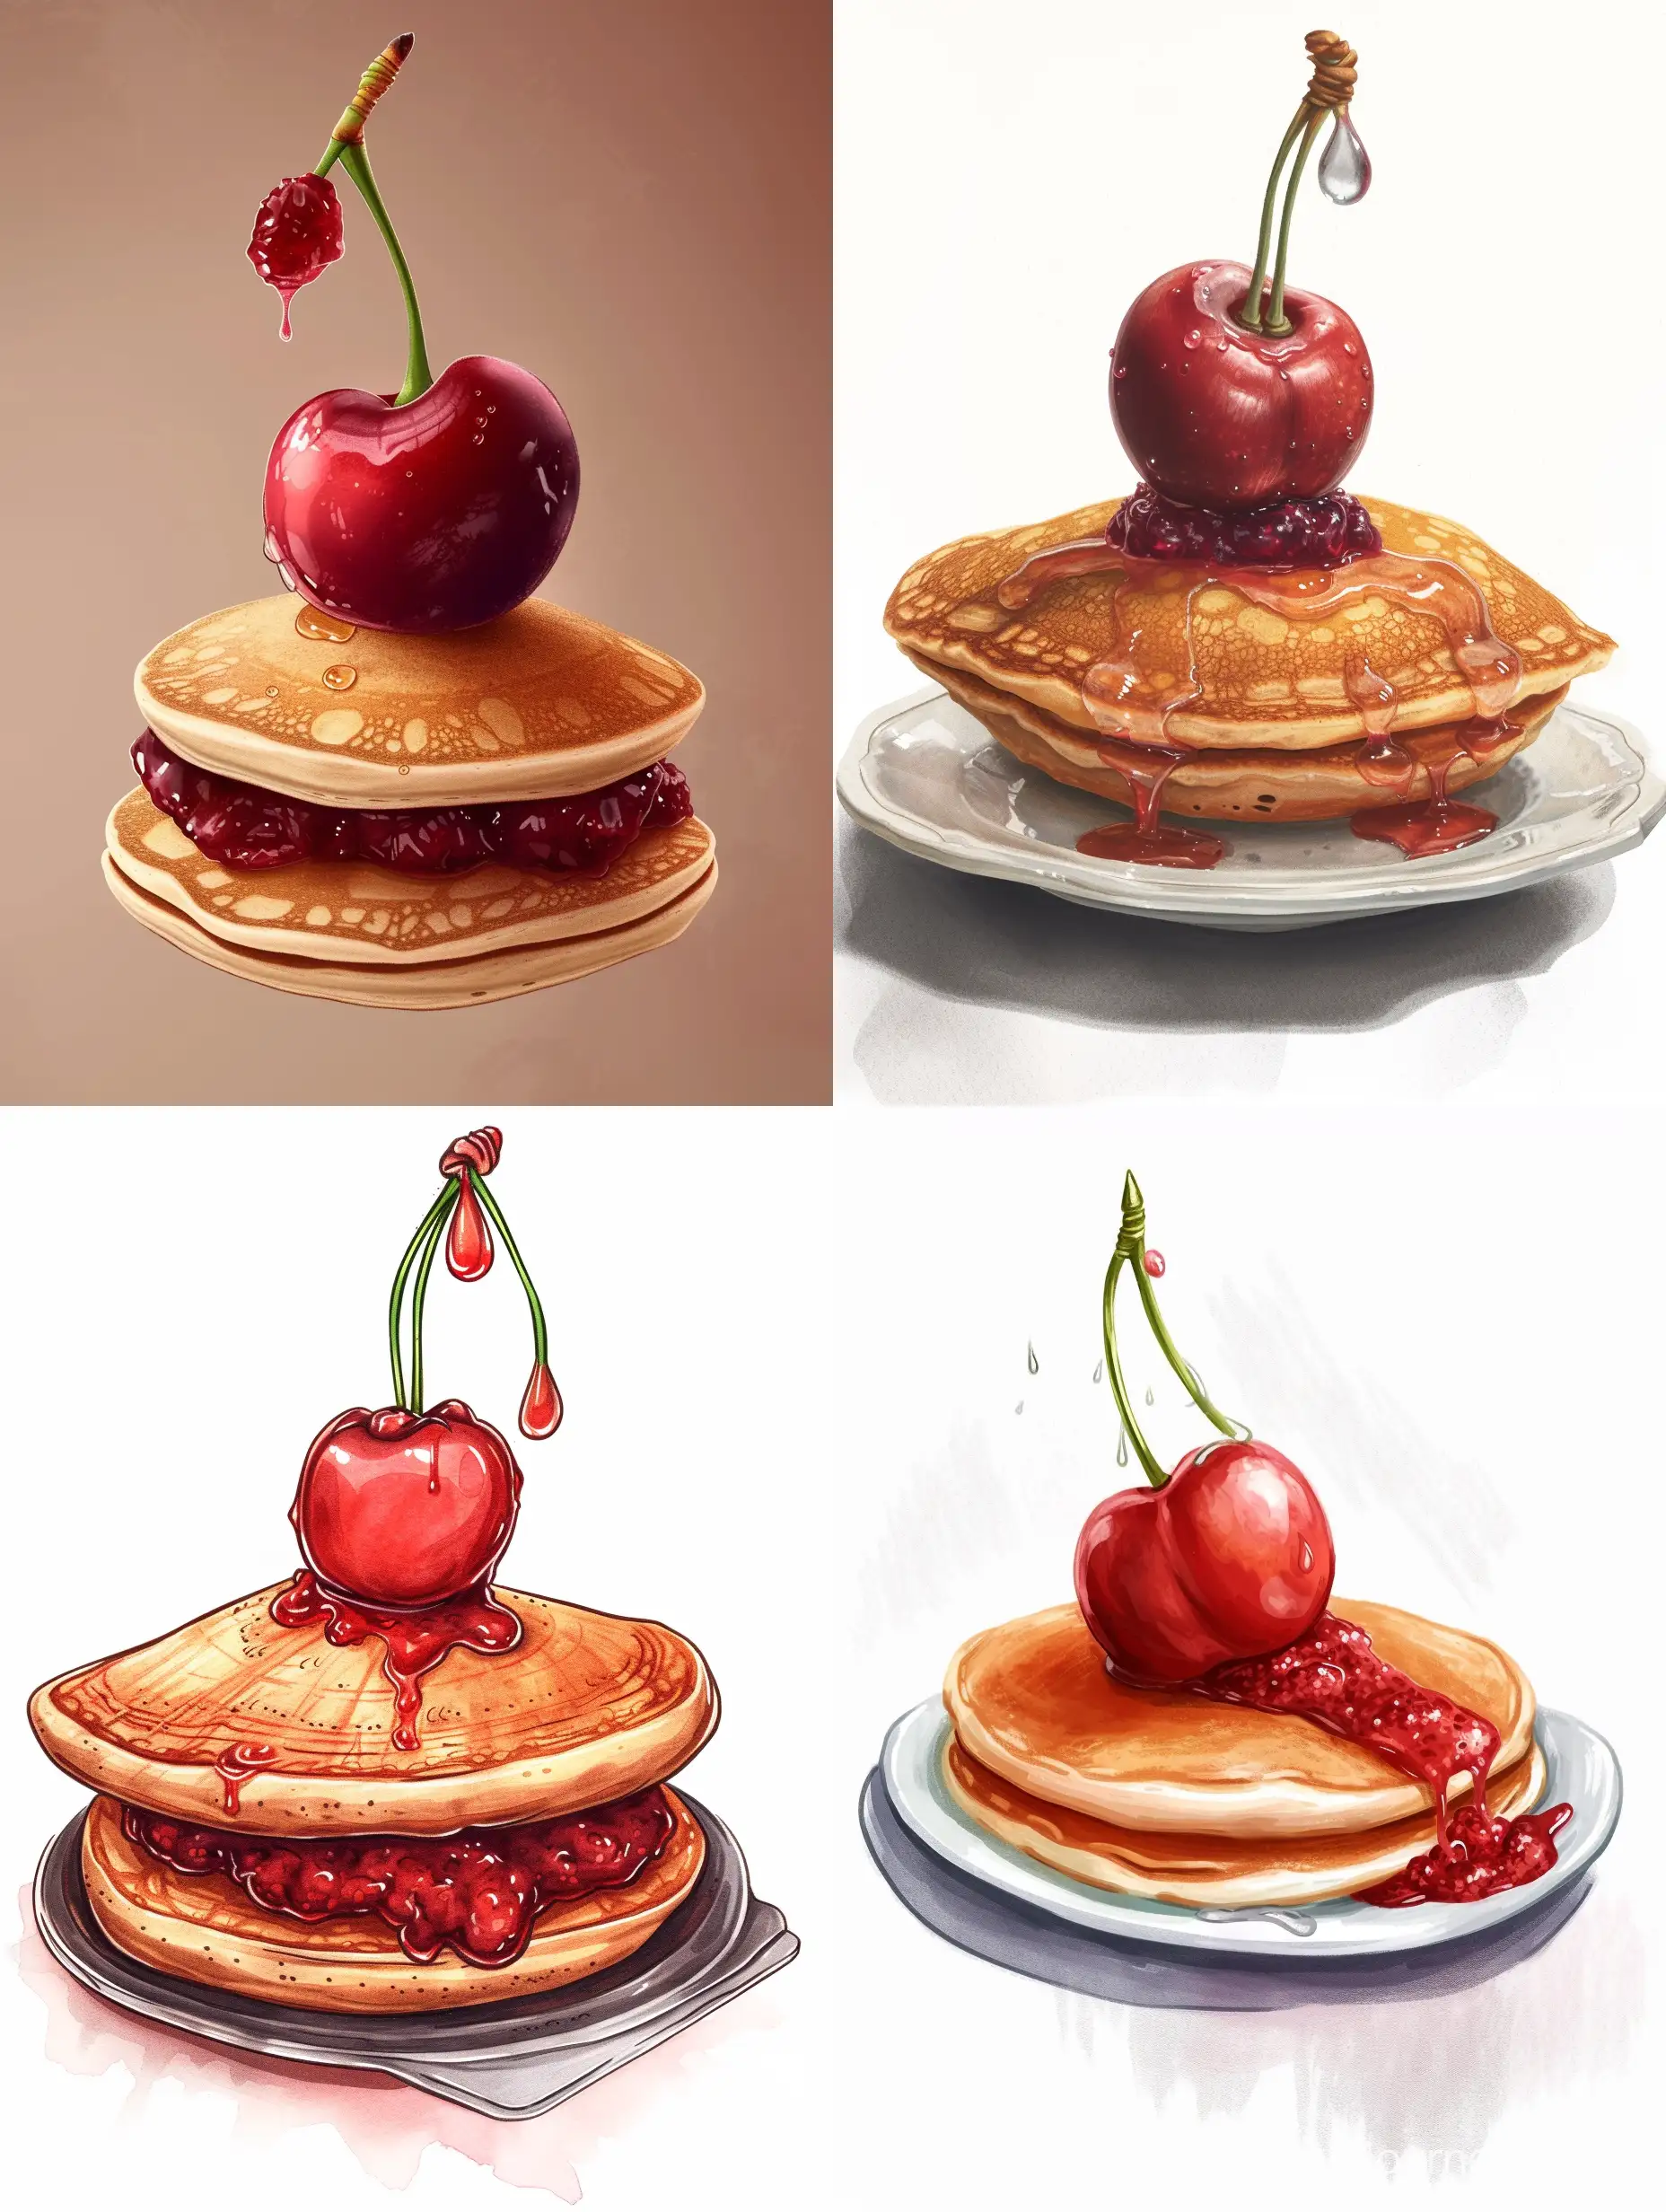 Delicious-Pancake-with-Transparent-Lousy-Jam-on-Large-Cherry-Tempting-Breakfast-Delight